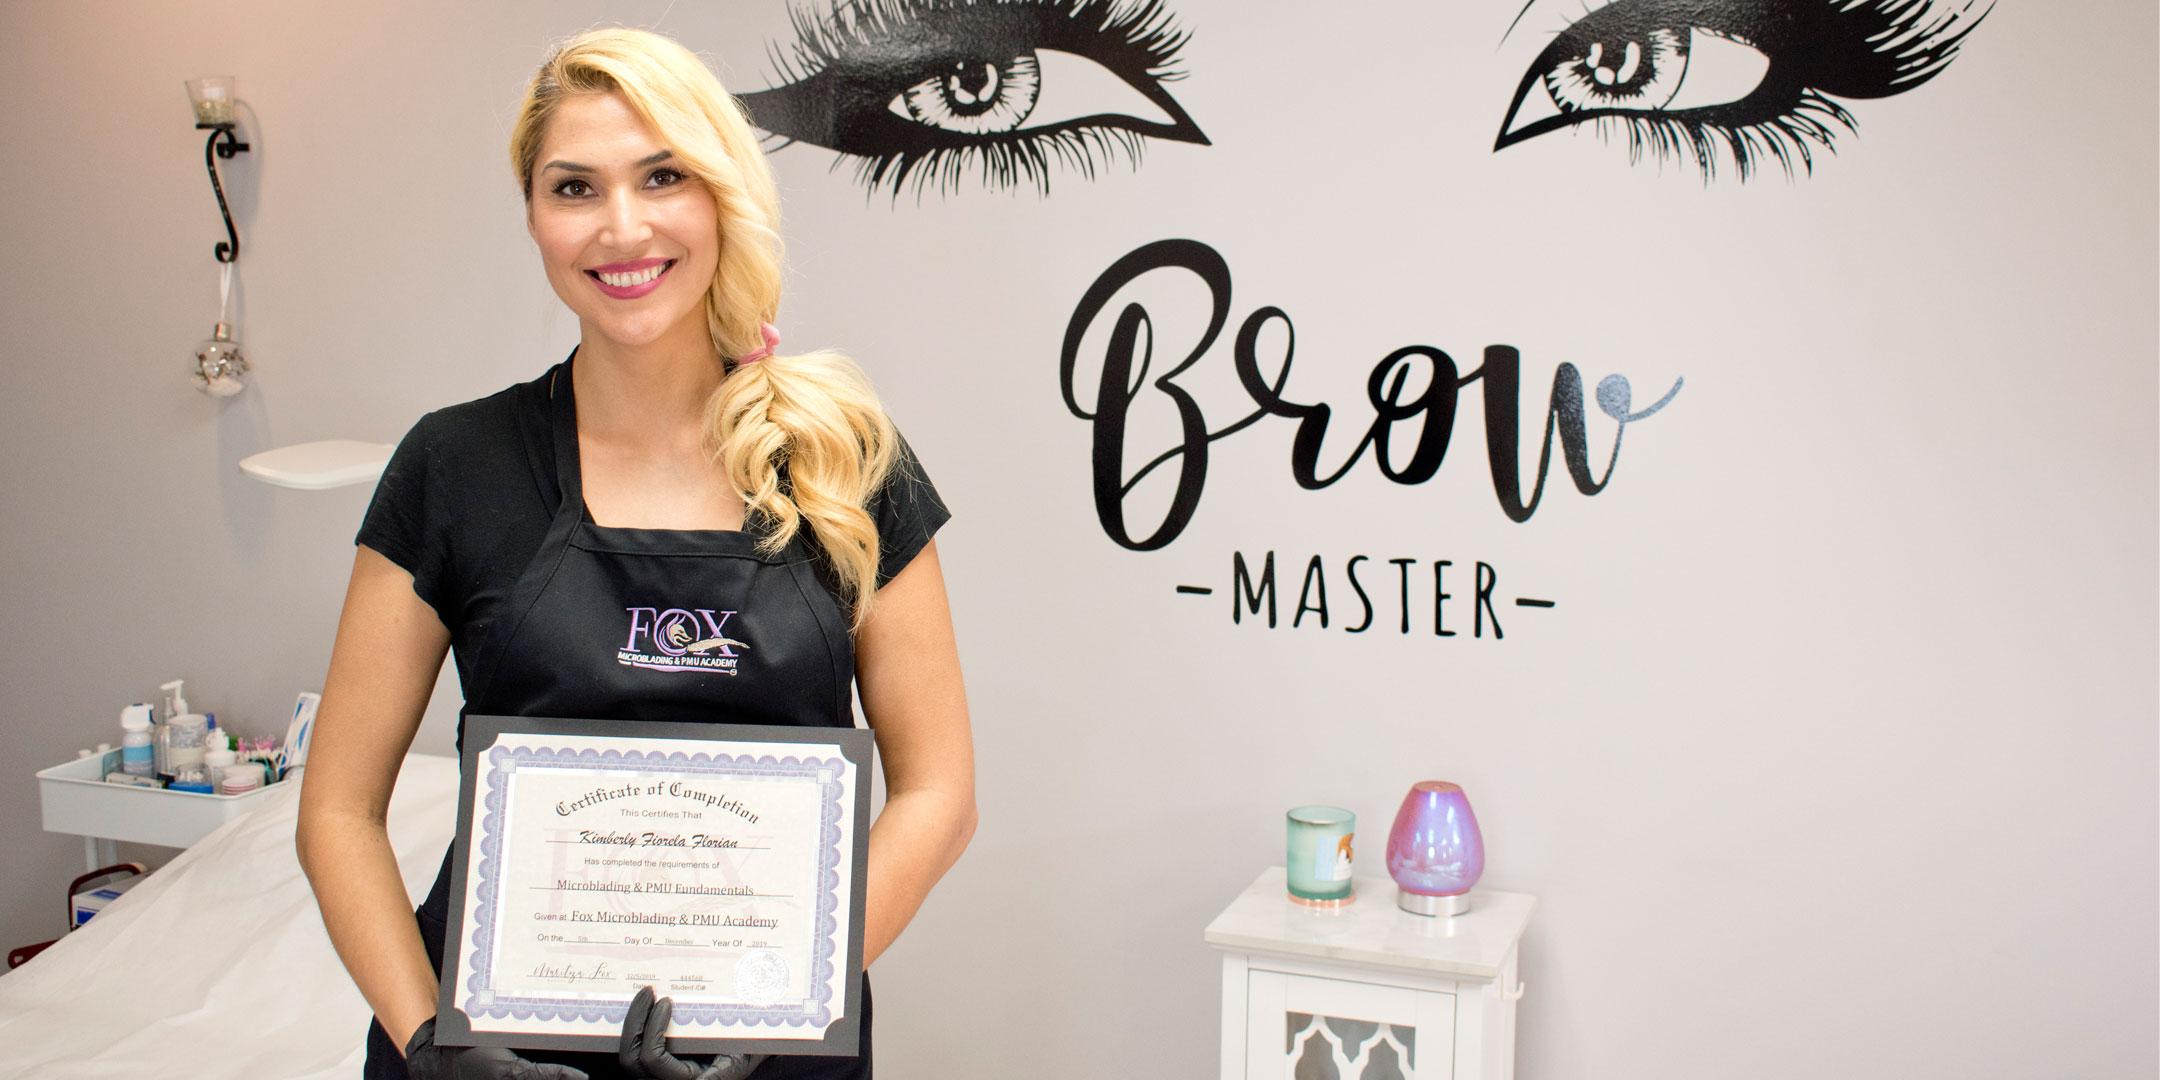 Microblading Training in Los Angeles 4 Day Course